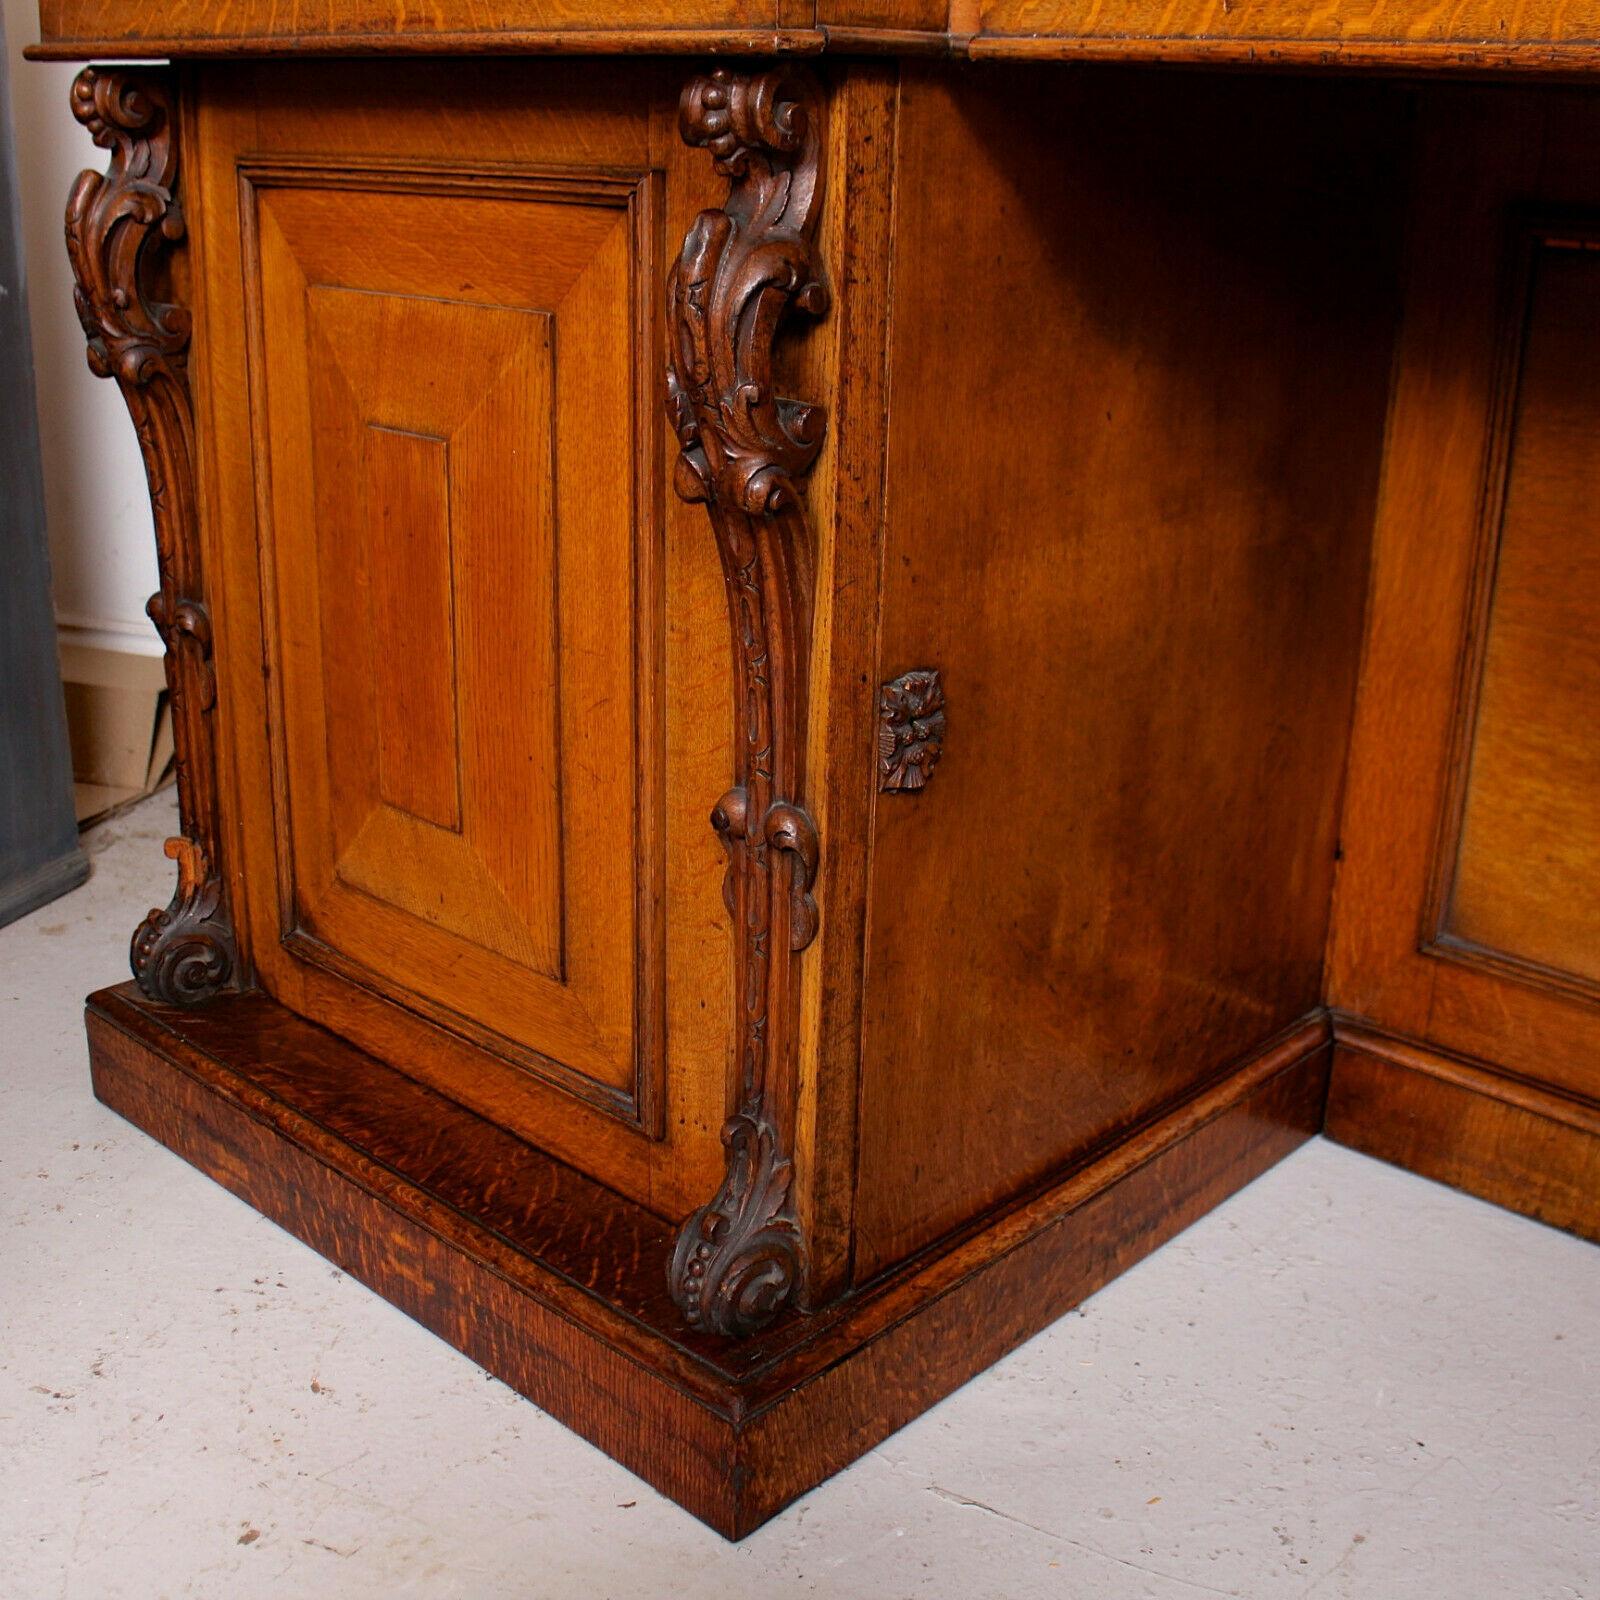 Large Antique Reverse Breakfront Oak Sideboard Desk In Good Condition For Sale In Newcastle upon Tyne, GB